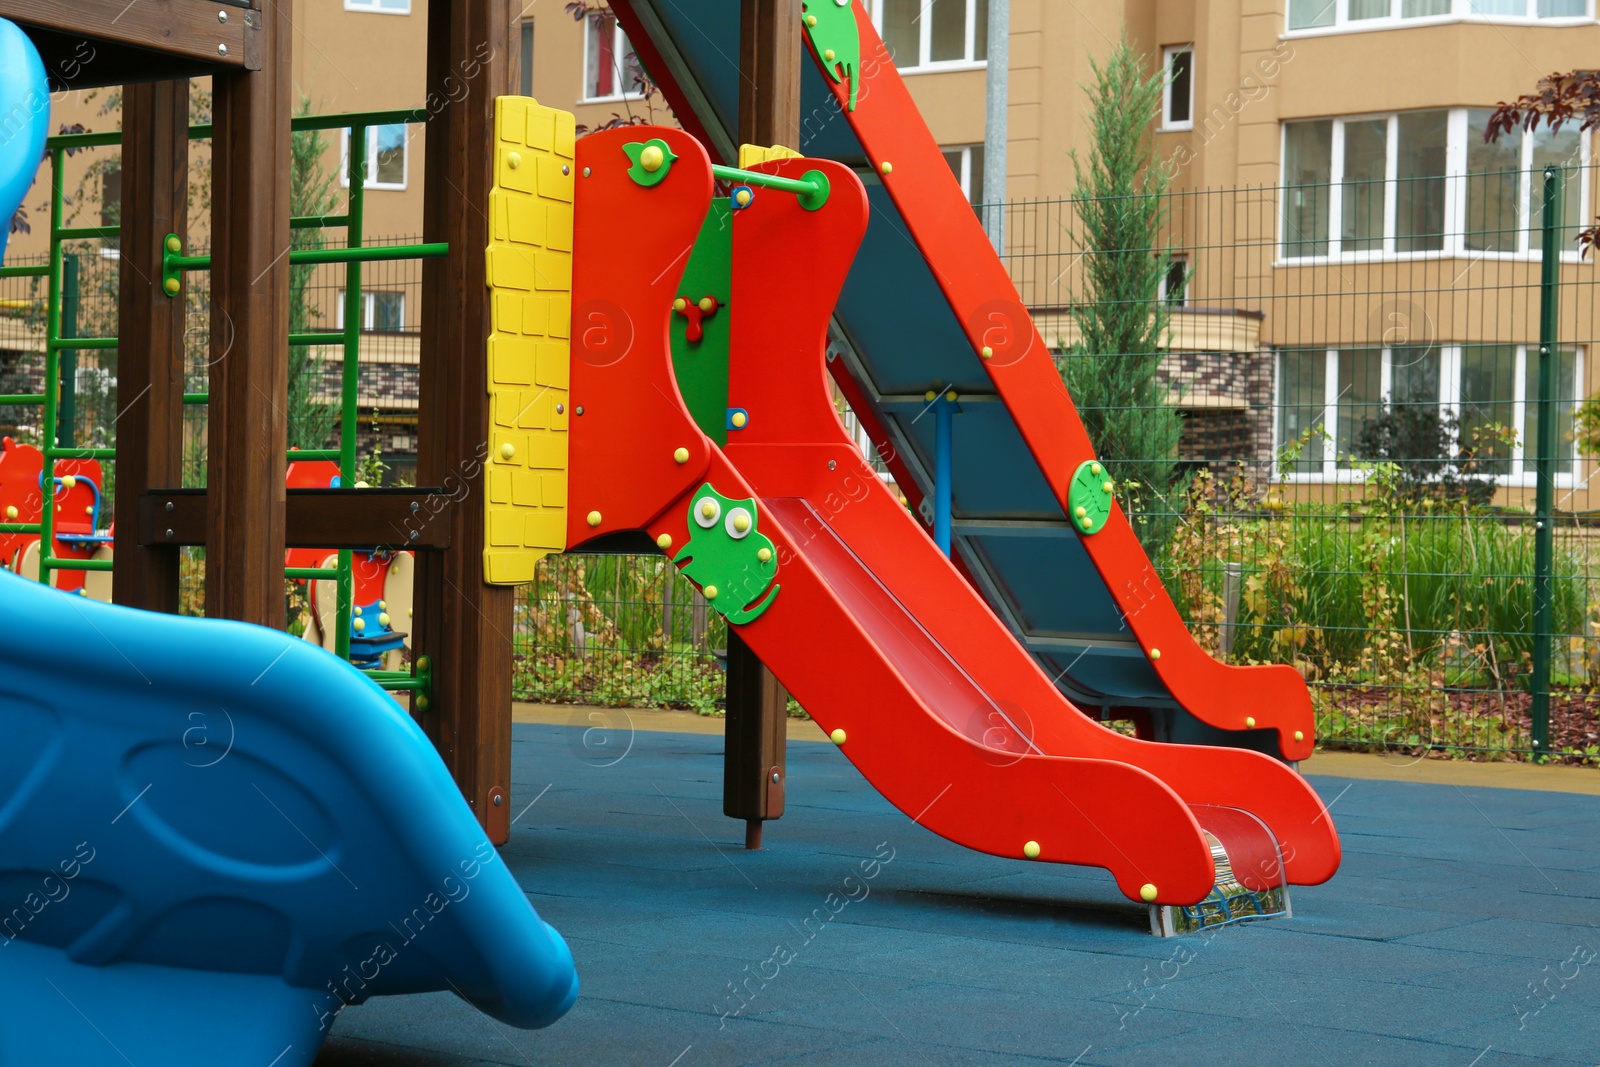 Photo of Colourful slide on outdoor playground for children in residential area